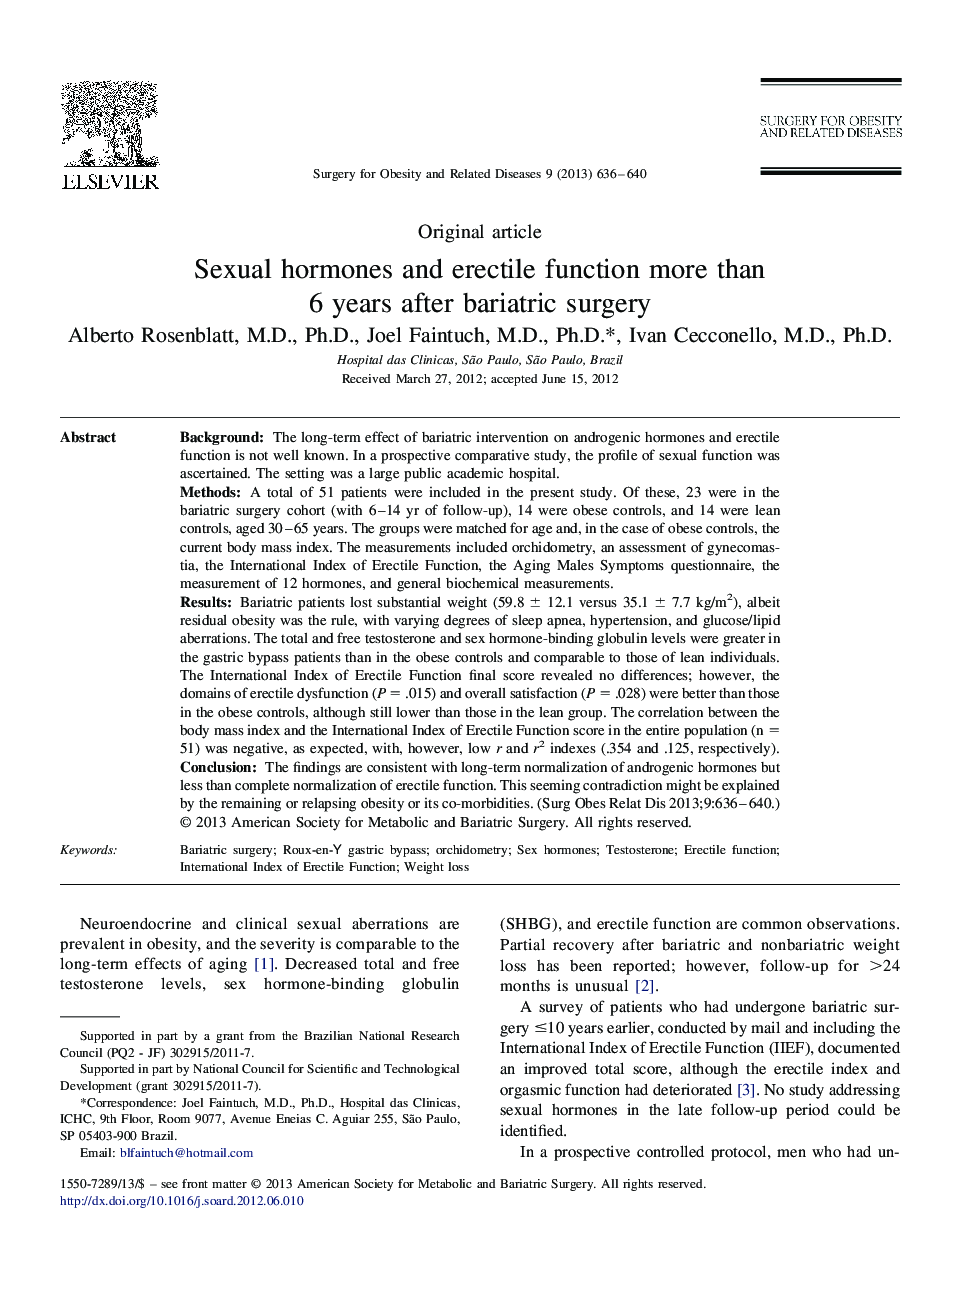 Sexual hormones and erectile function more than 6 years after bariatric surgery